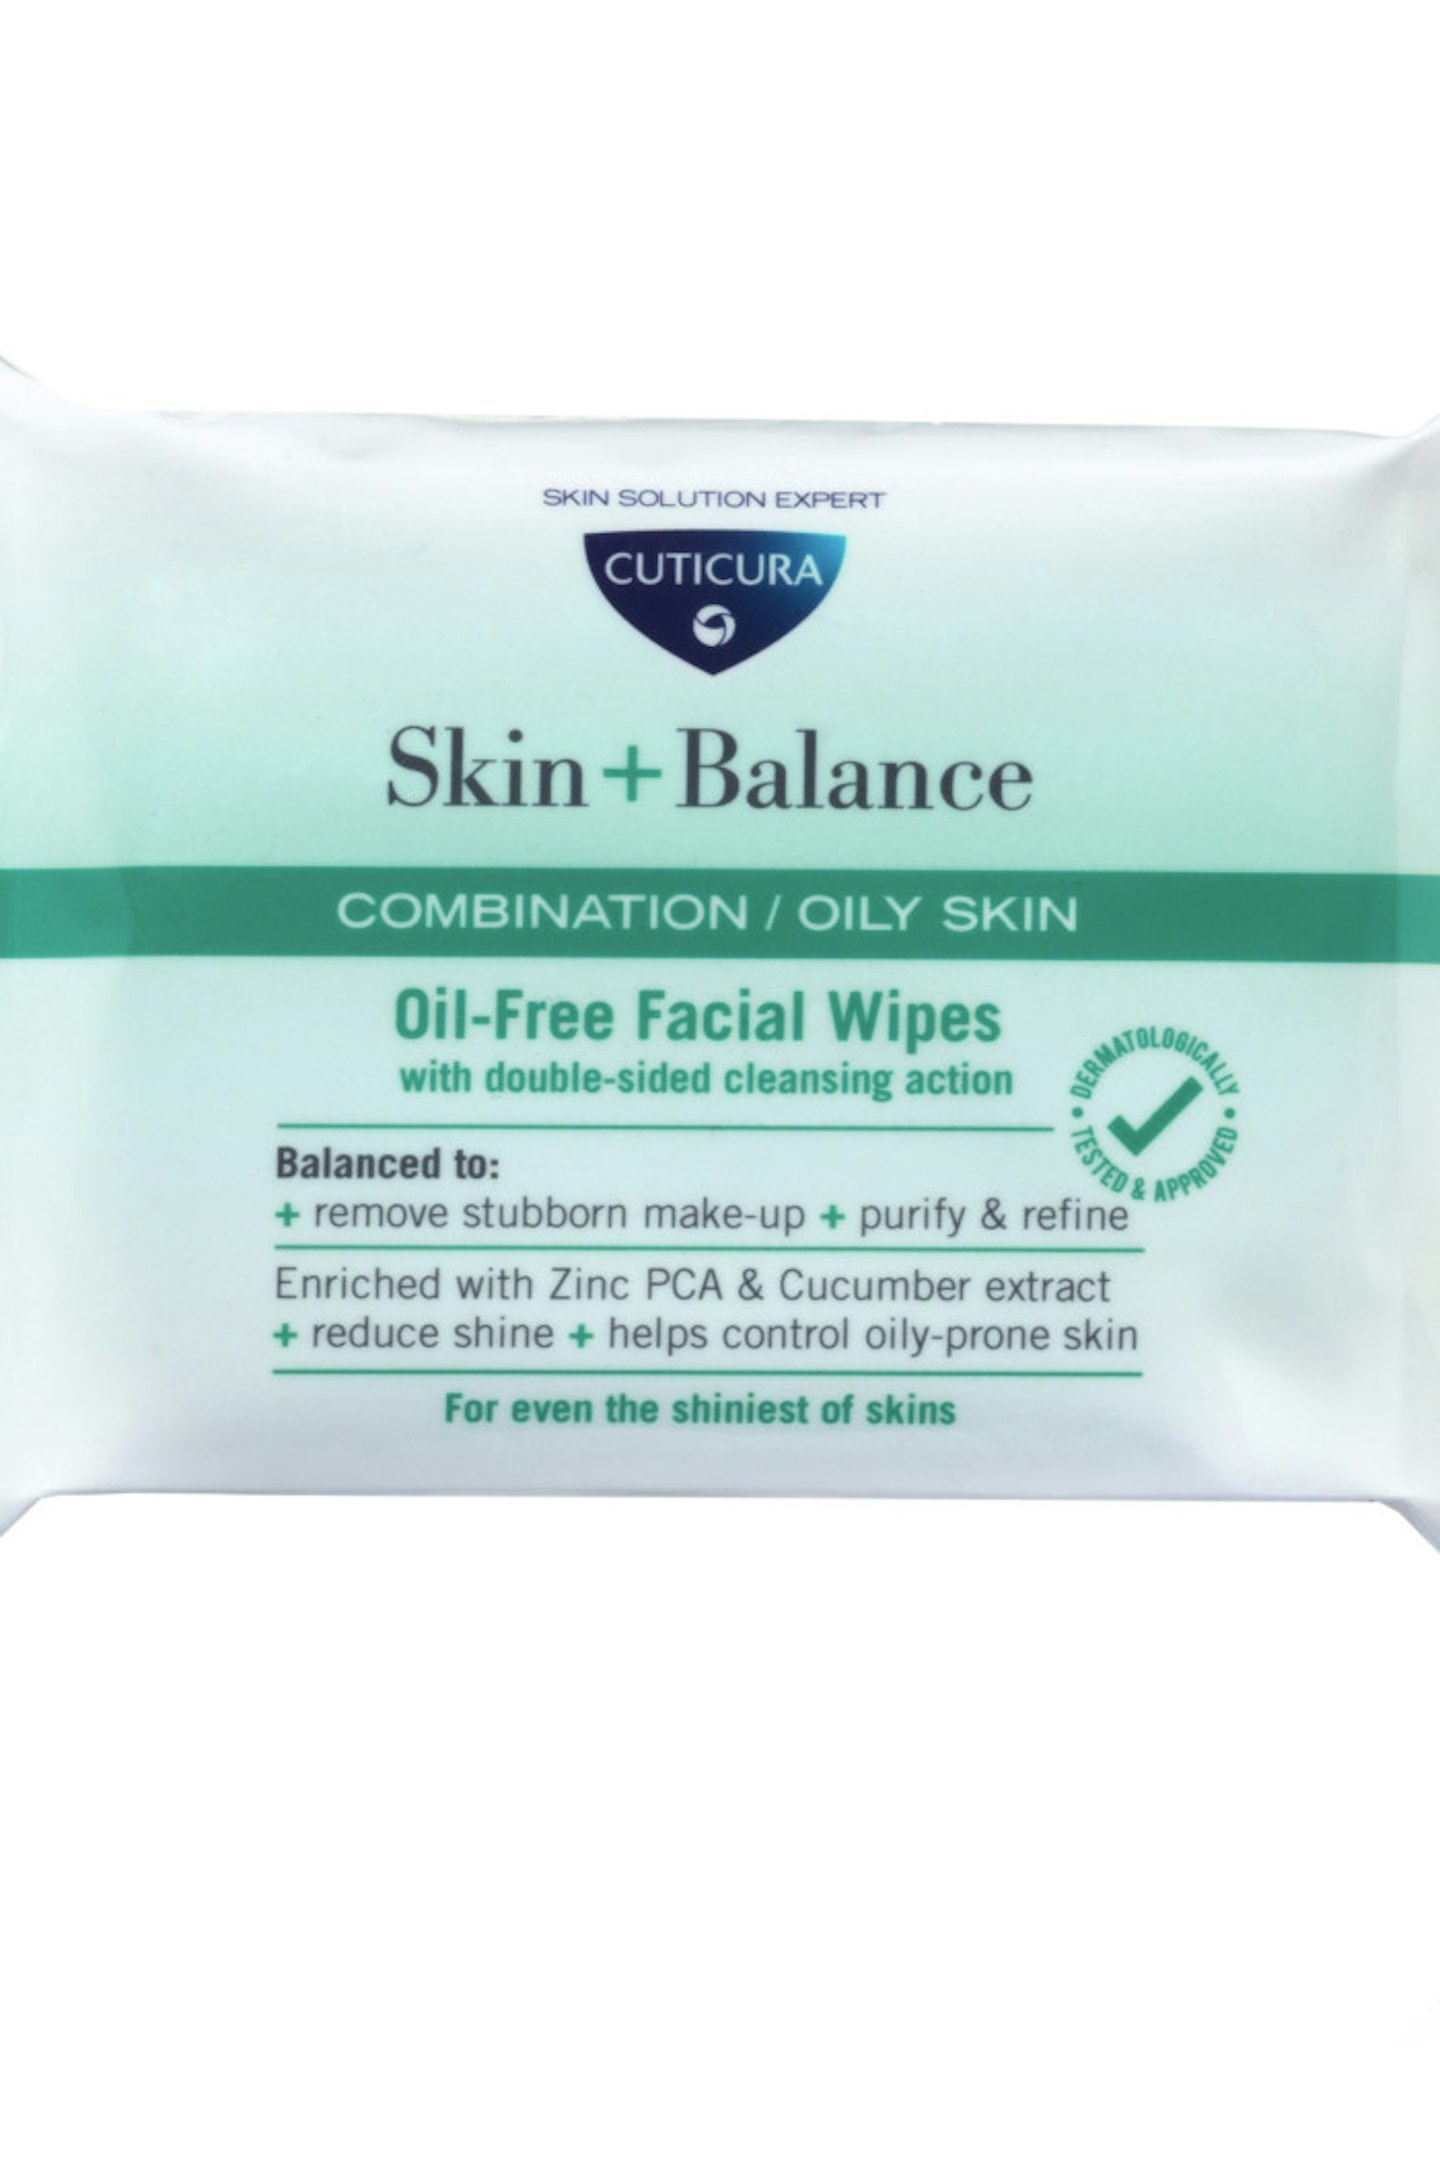 Skin + Balance Oil-free Facial Wipes, £1.79, 25 pack